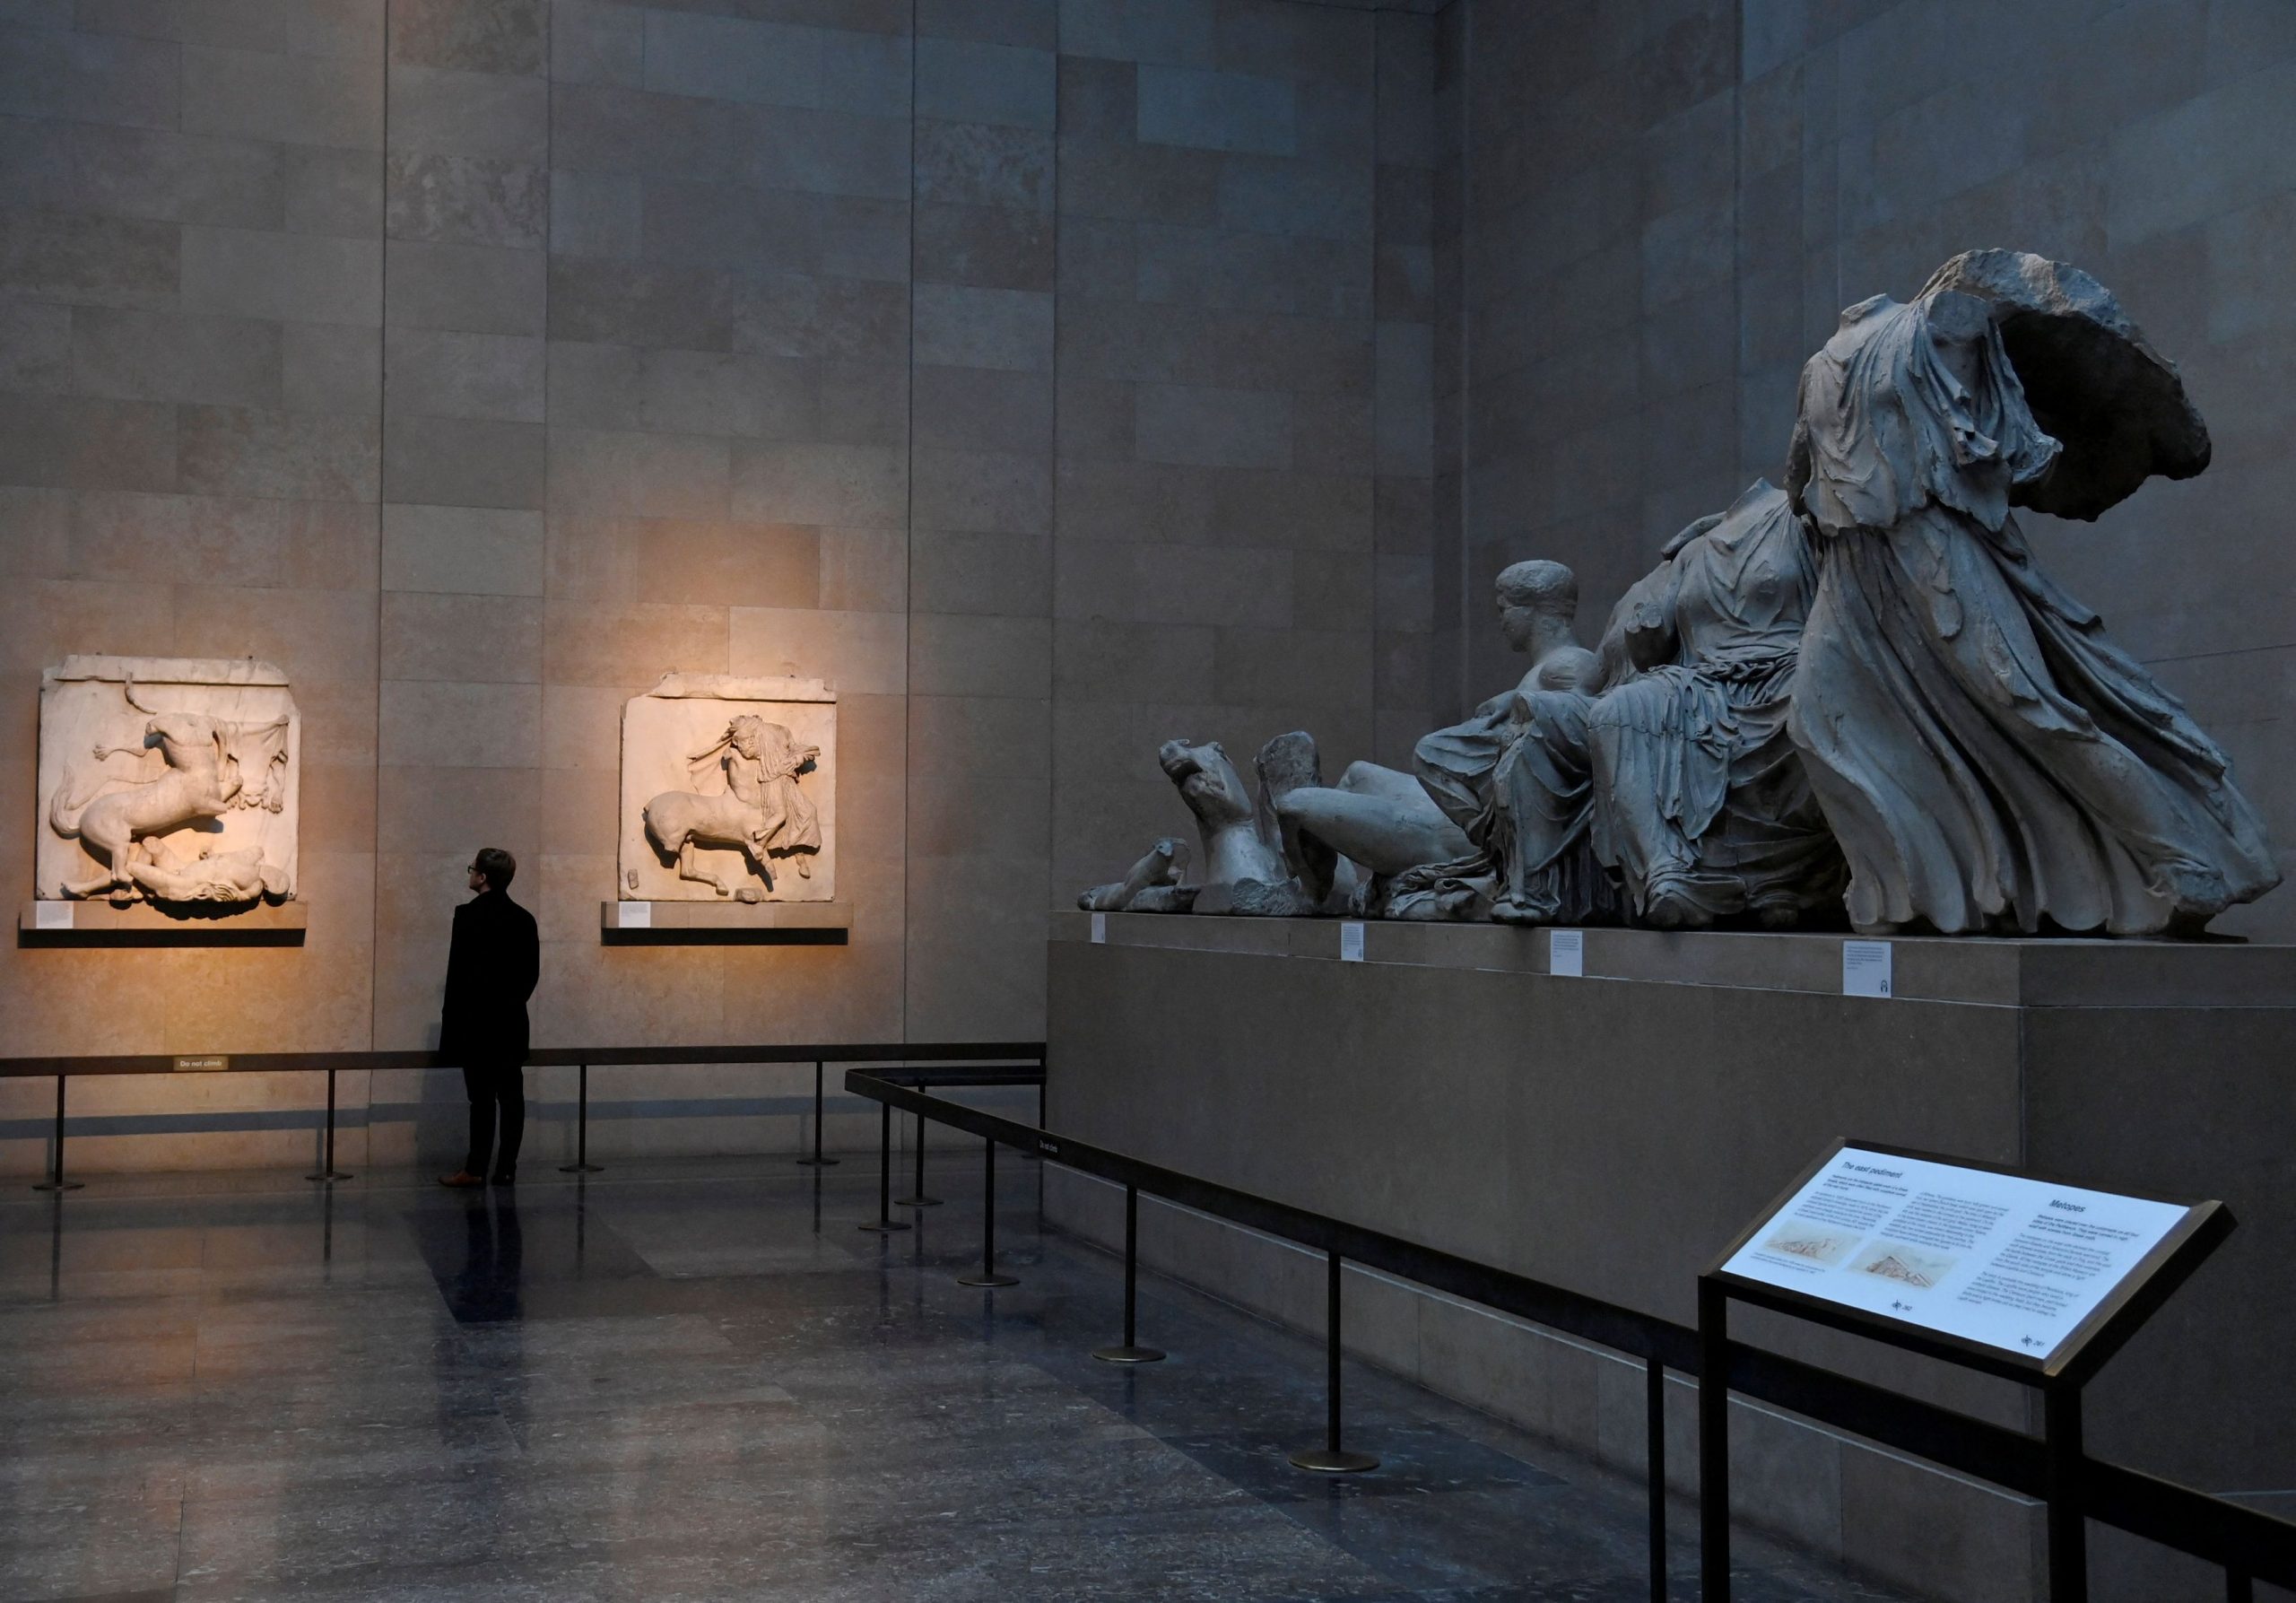 British Museum Open to Temporary Return of Parthenon Marbles